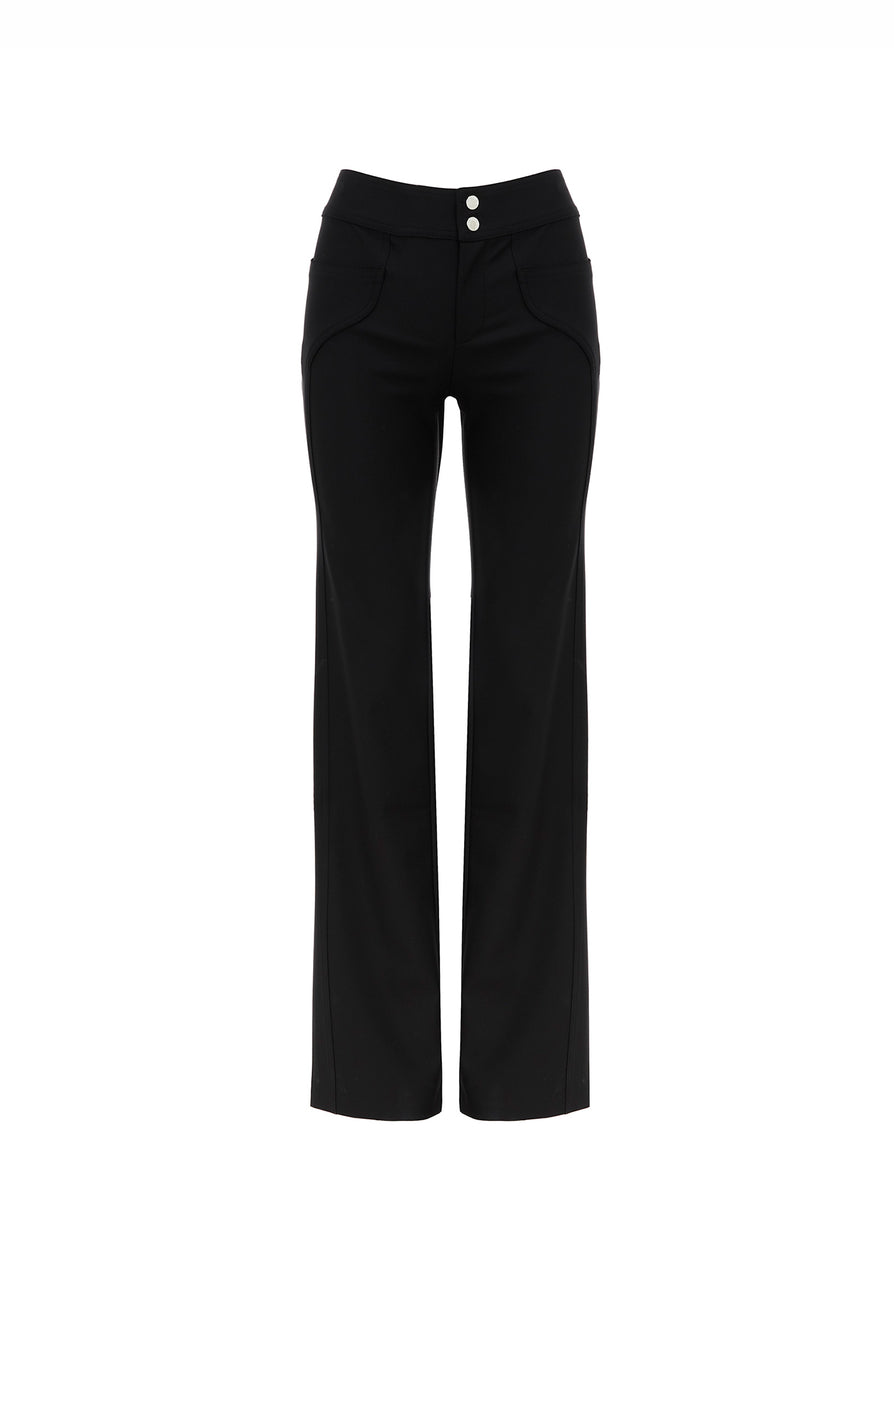 THE GWEN PANT BLACK | ghost